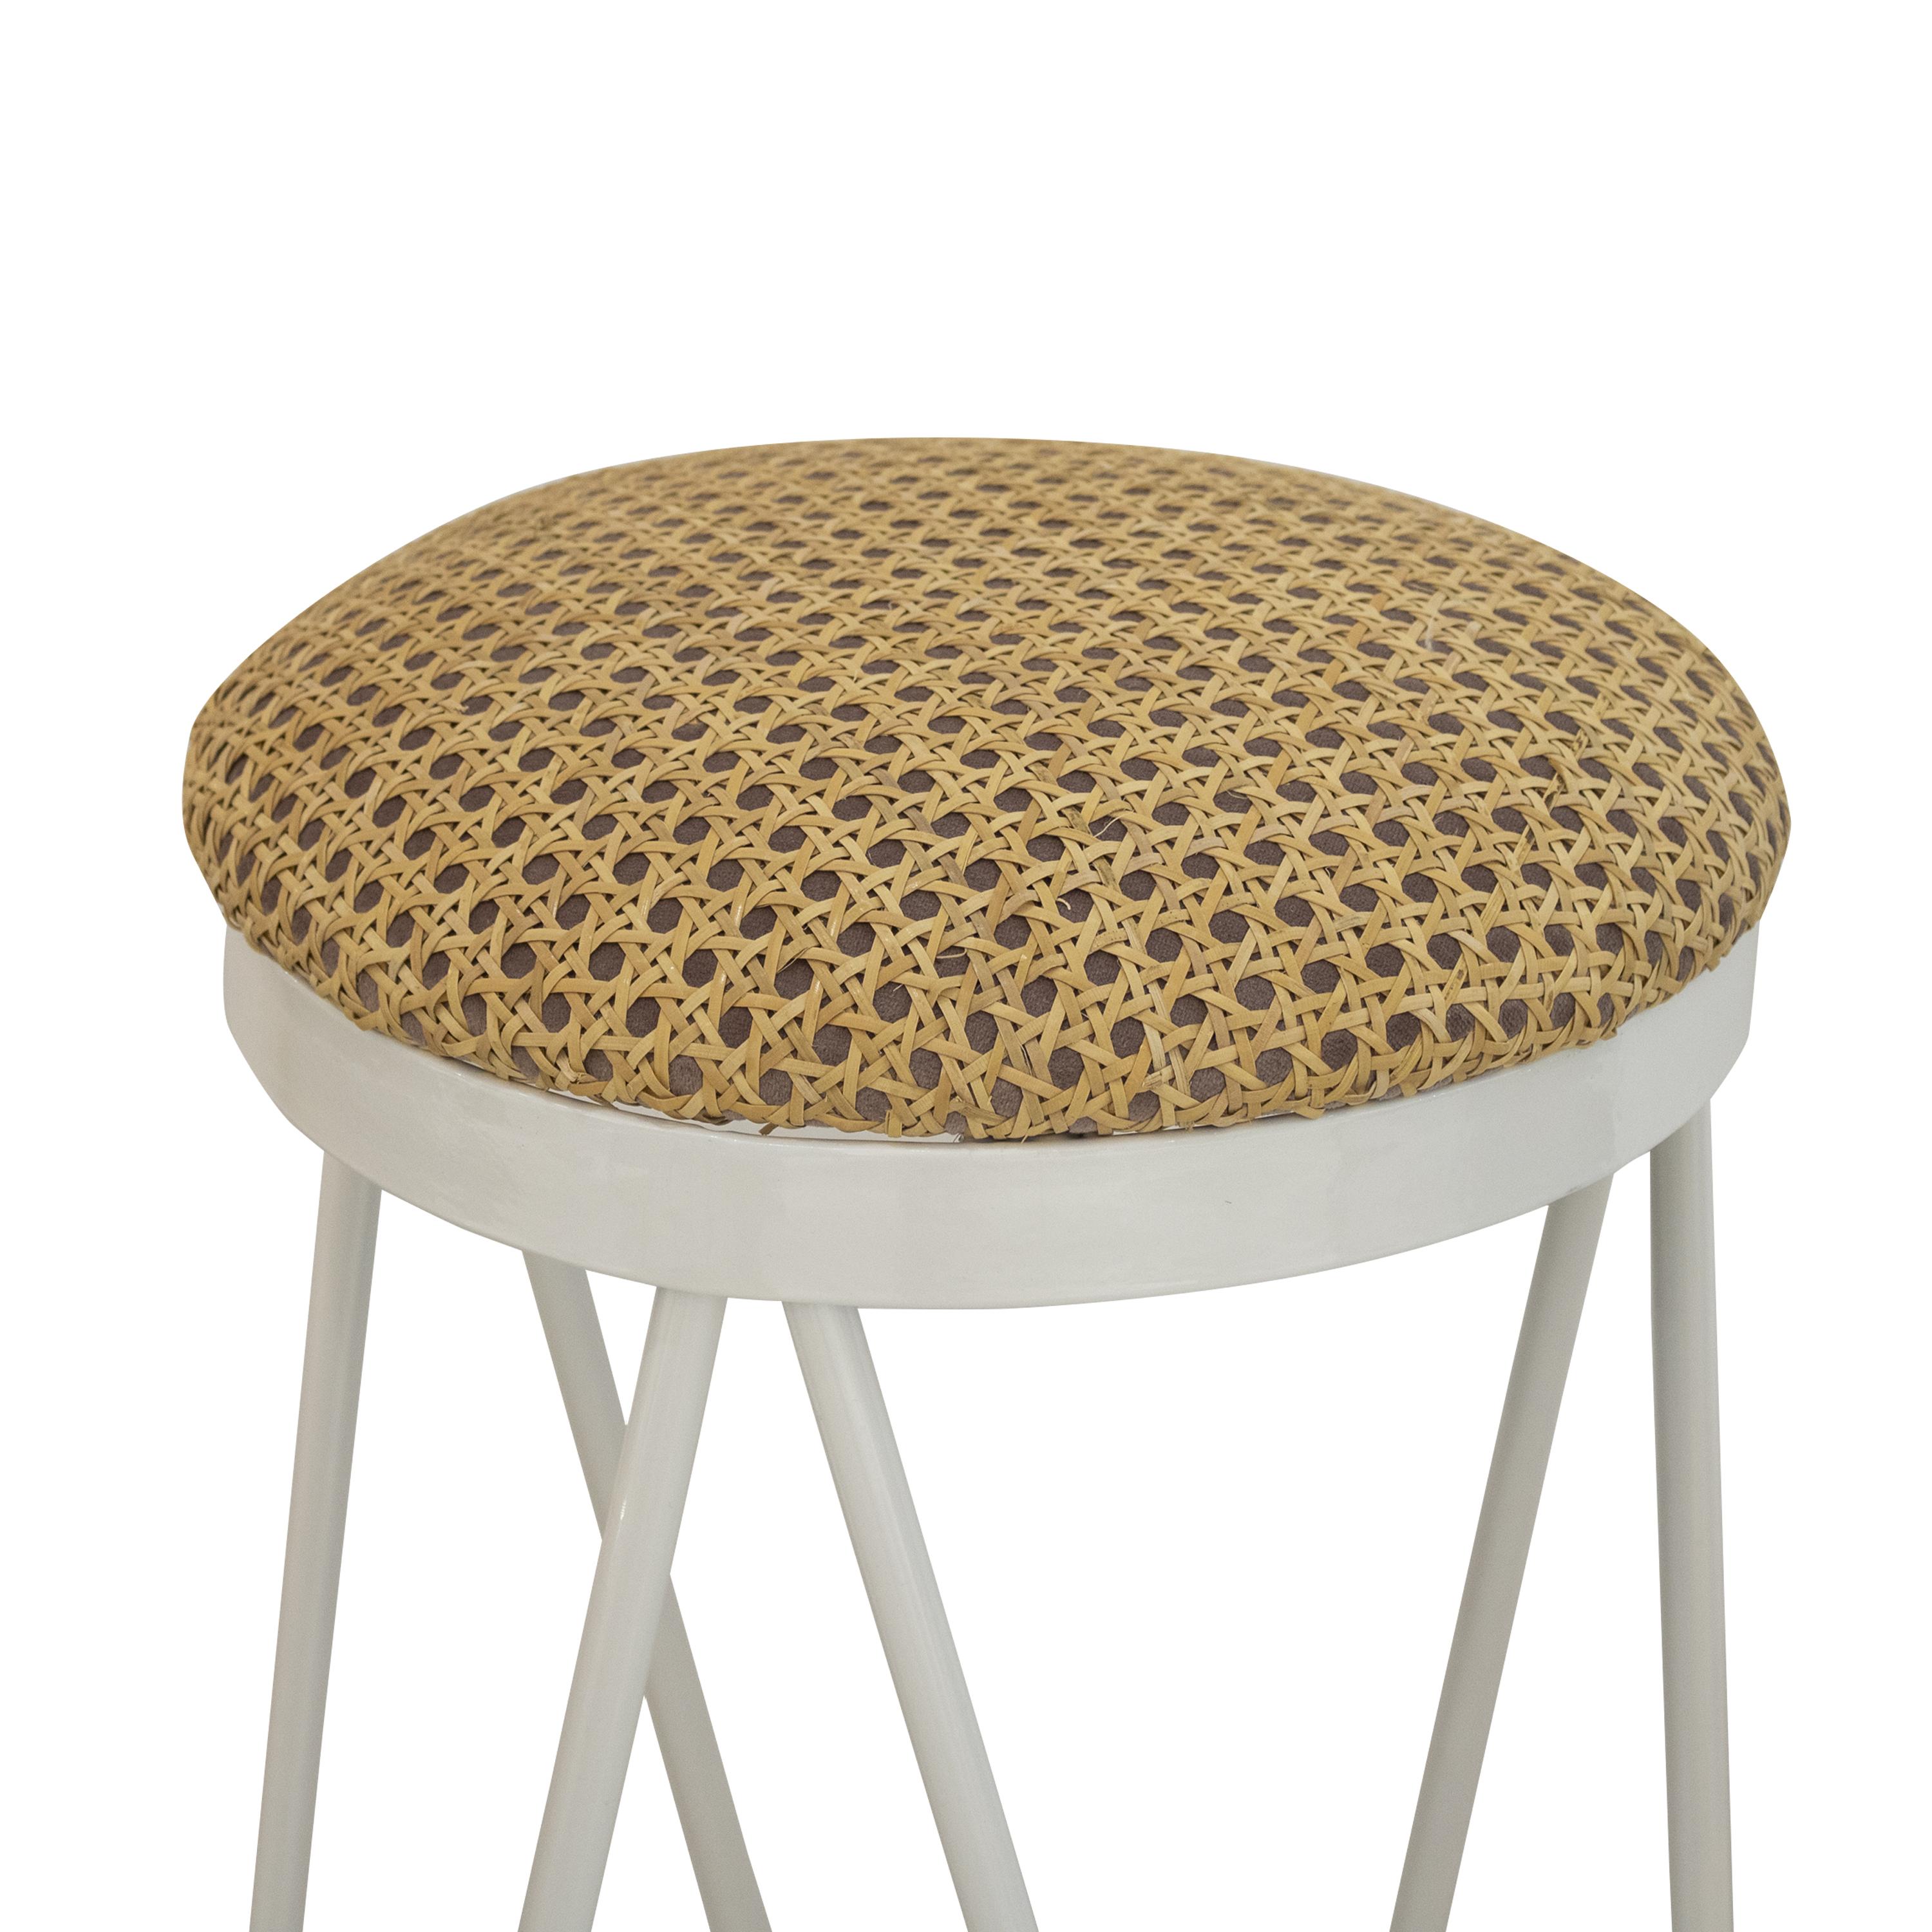 Steel Stool Designed by IKB191 Studio Upholstered in Wicker, Spain 2022 In New Condition For Sale In Madrid, ES